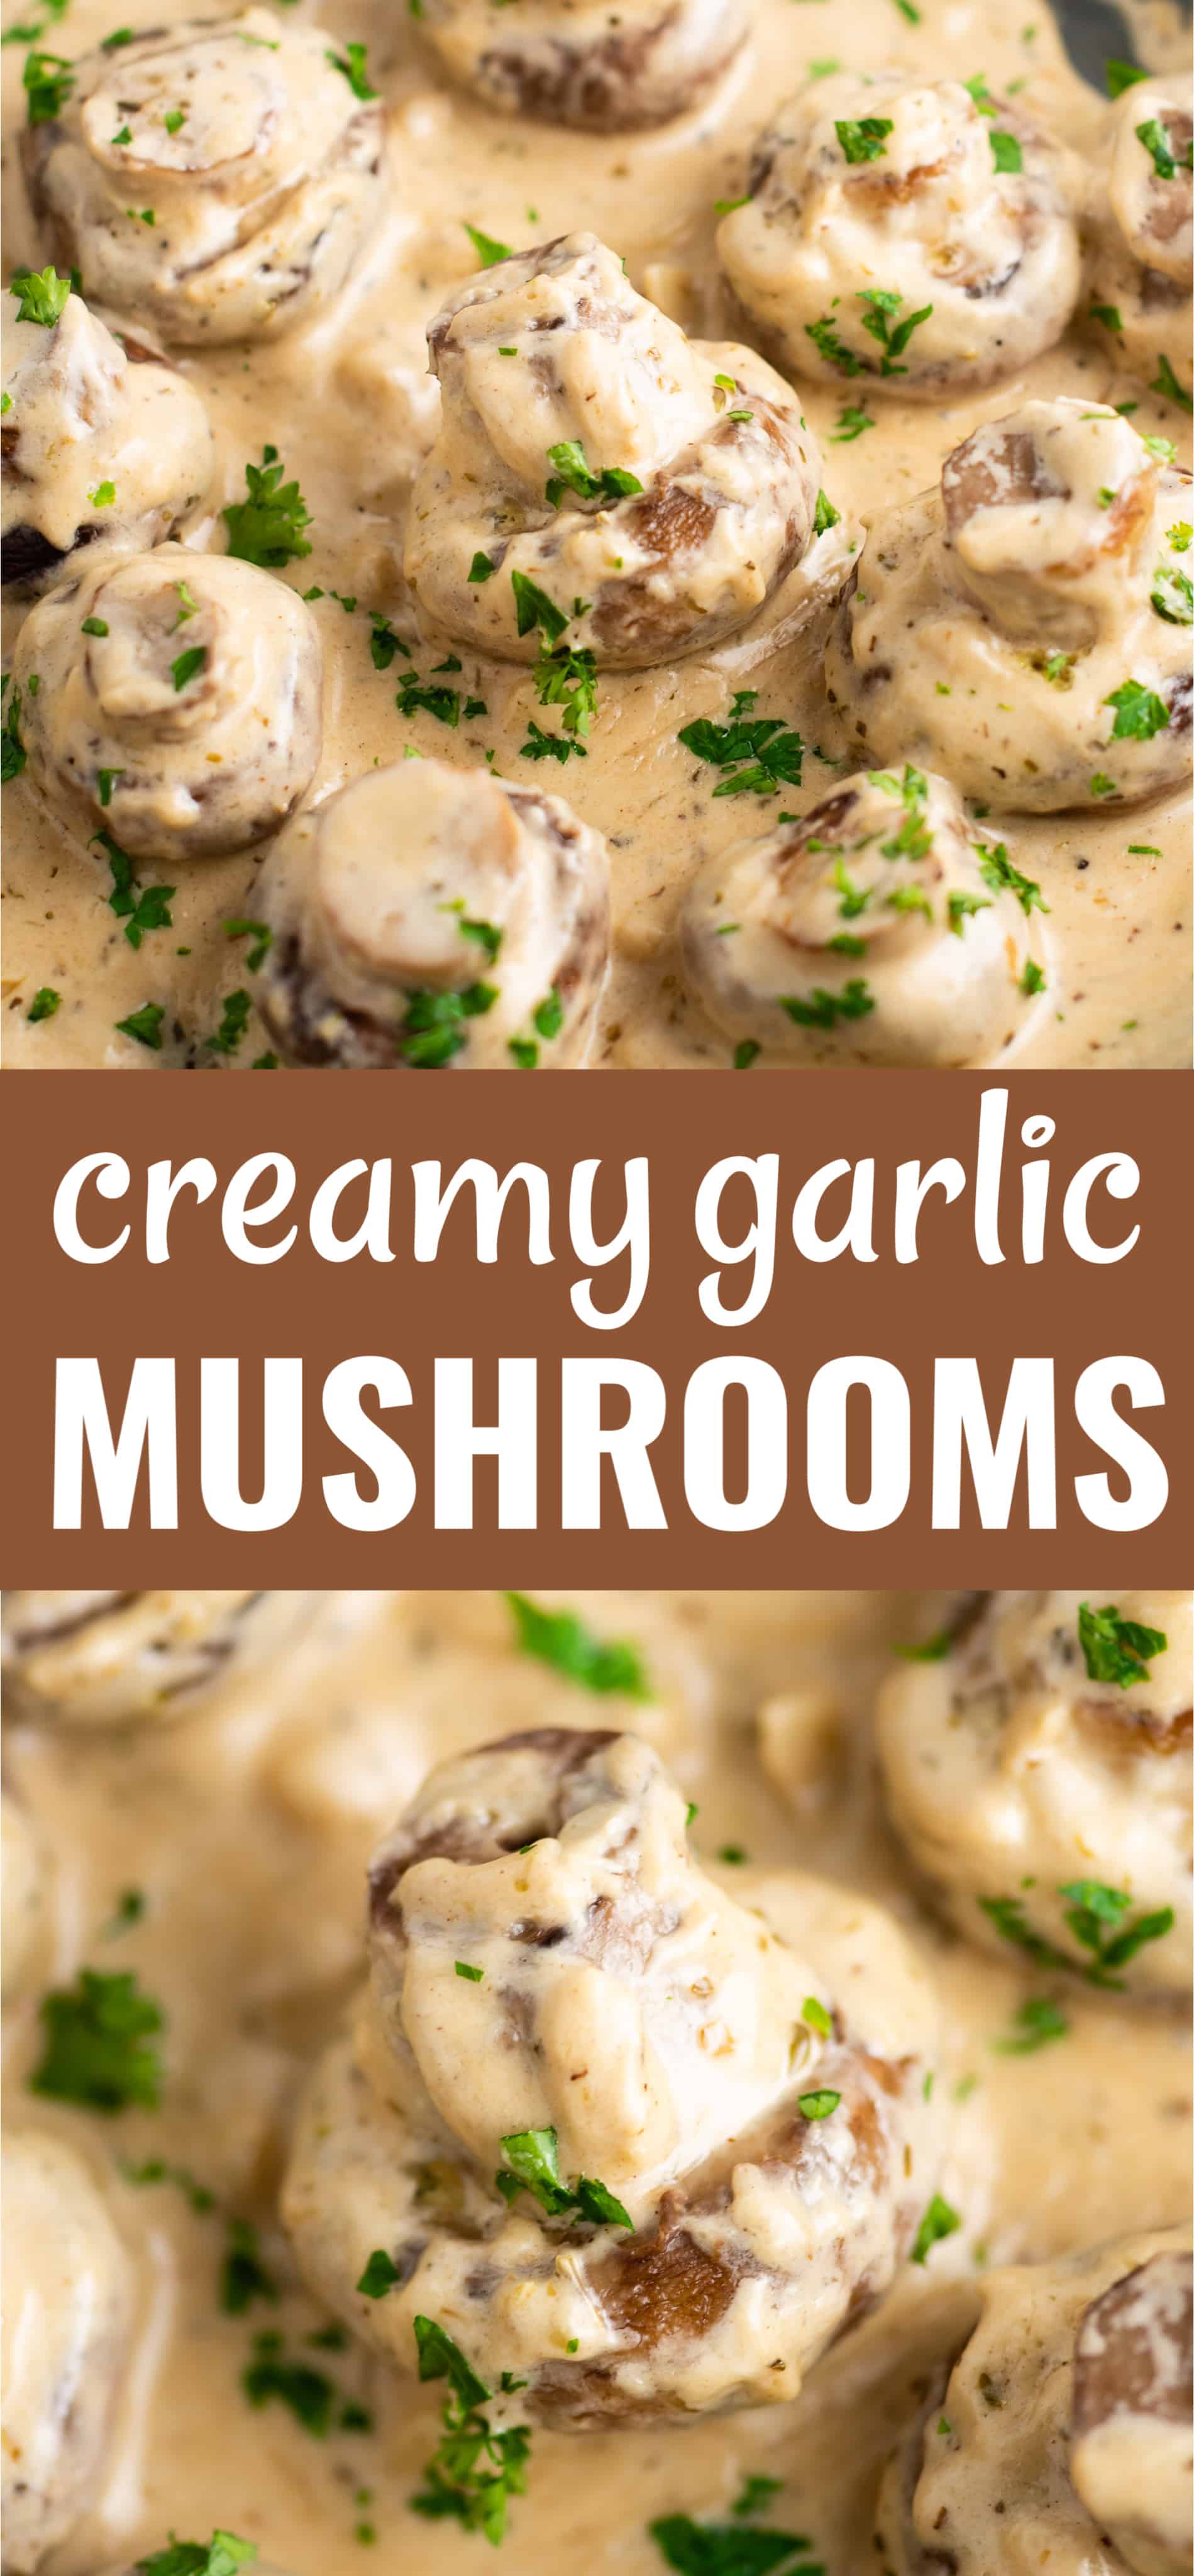 image of the mushrooms with the text "creamy garlic mushrooms" 